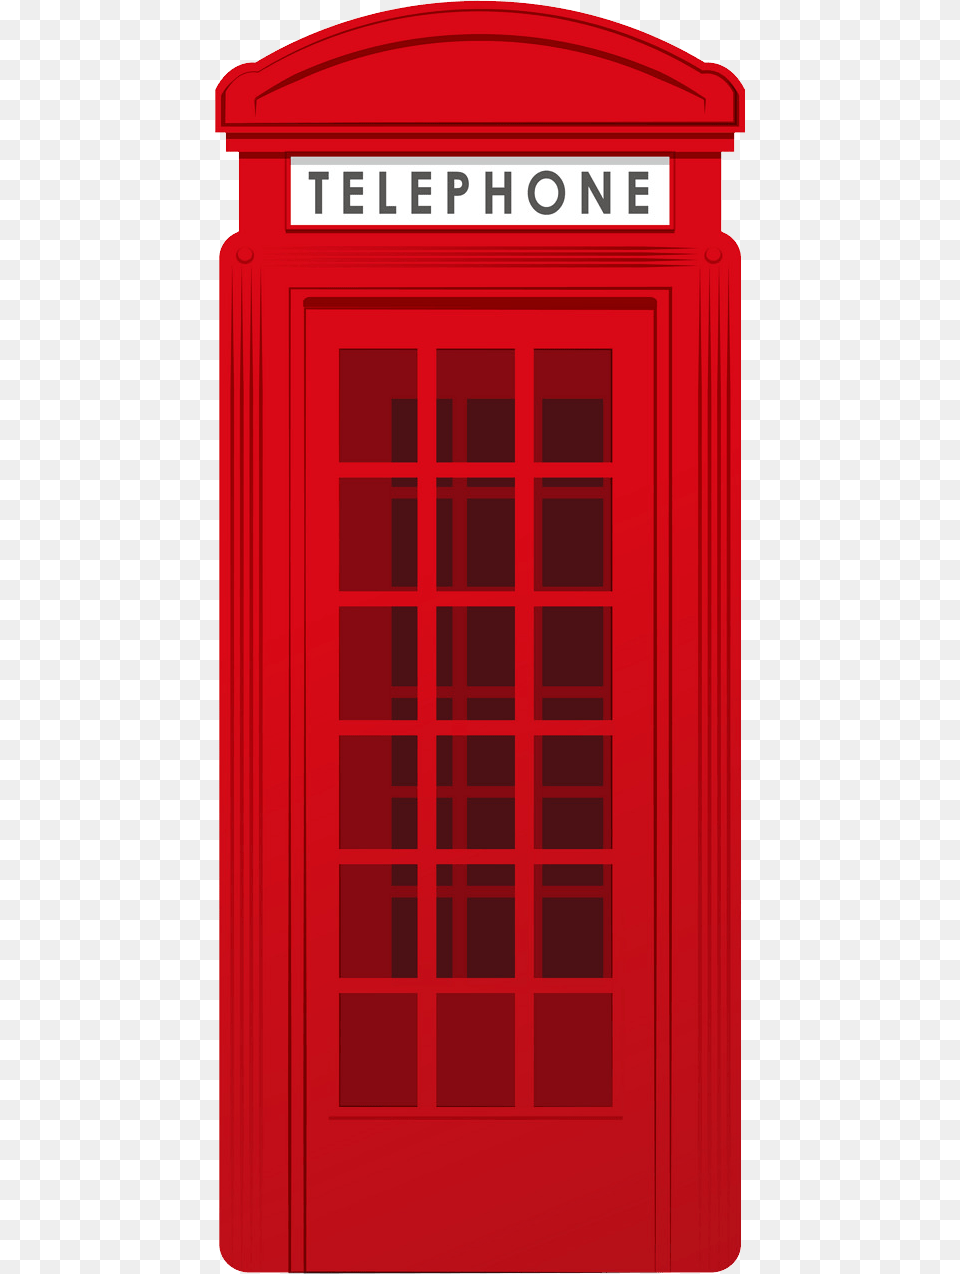 Telephone Booth, Mailbox, Phone Booth Png